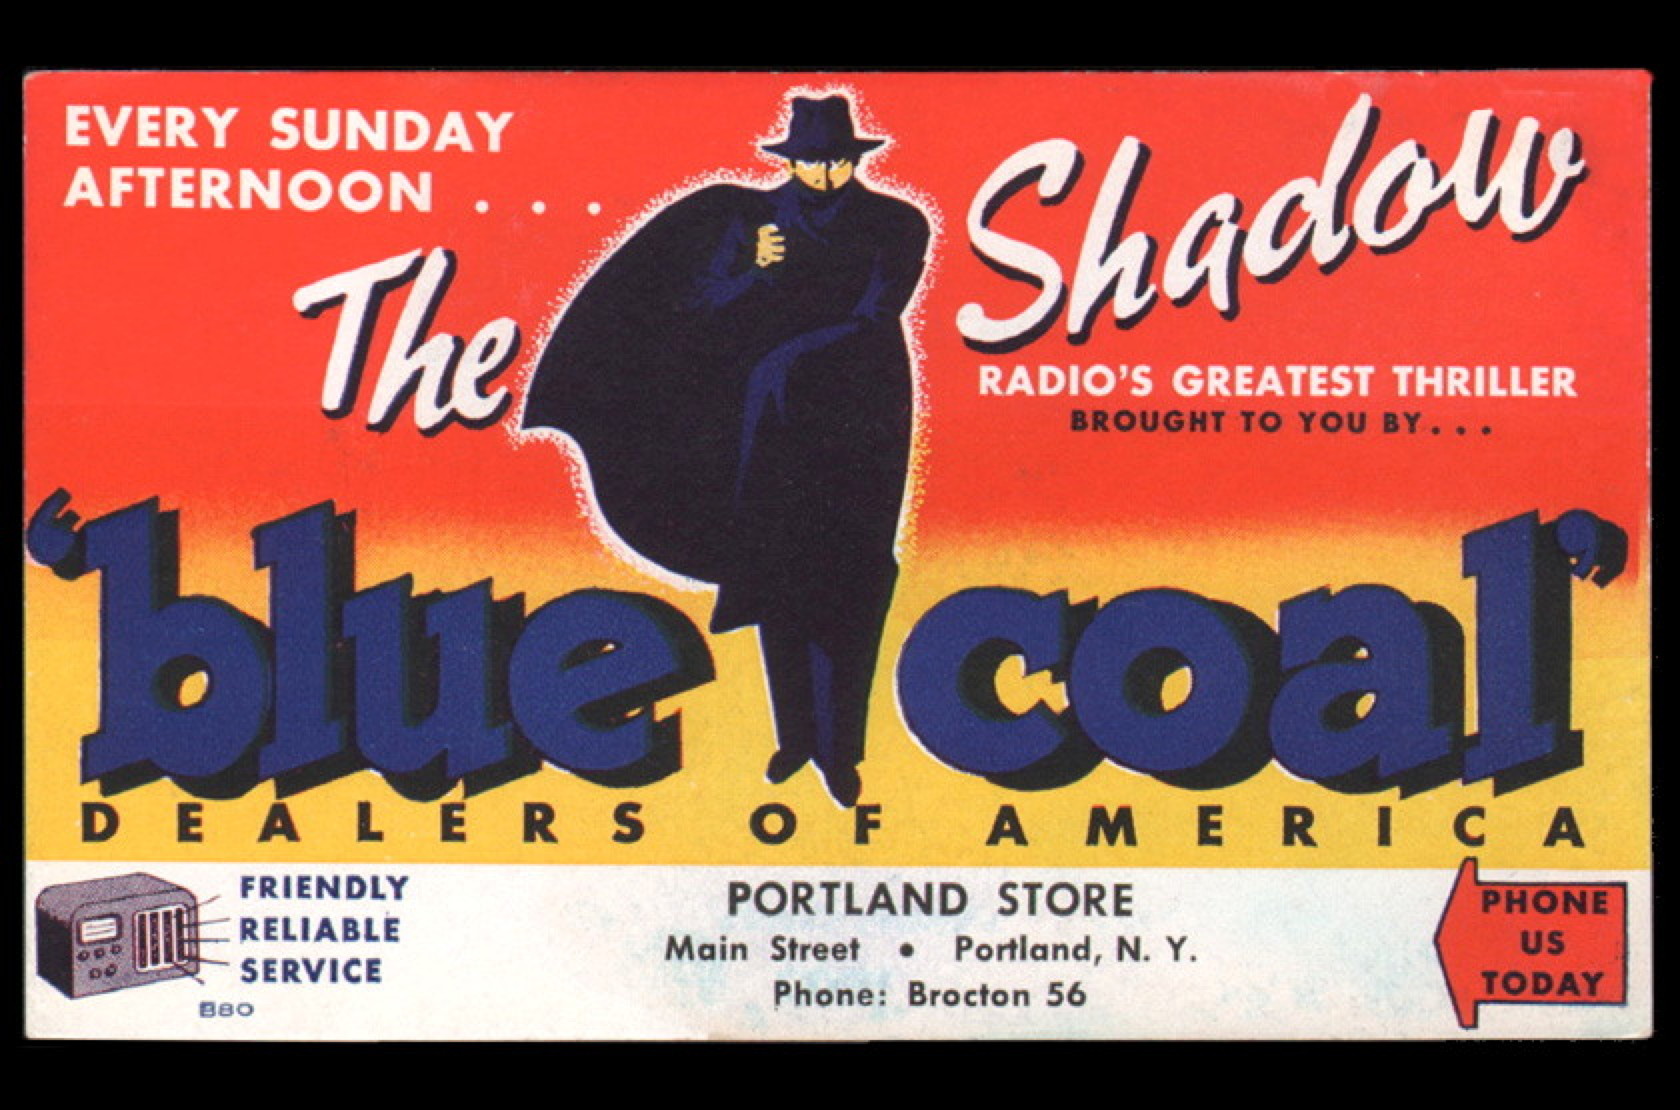 Ink blotter for Blue Coal, featuring The Shadow.